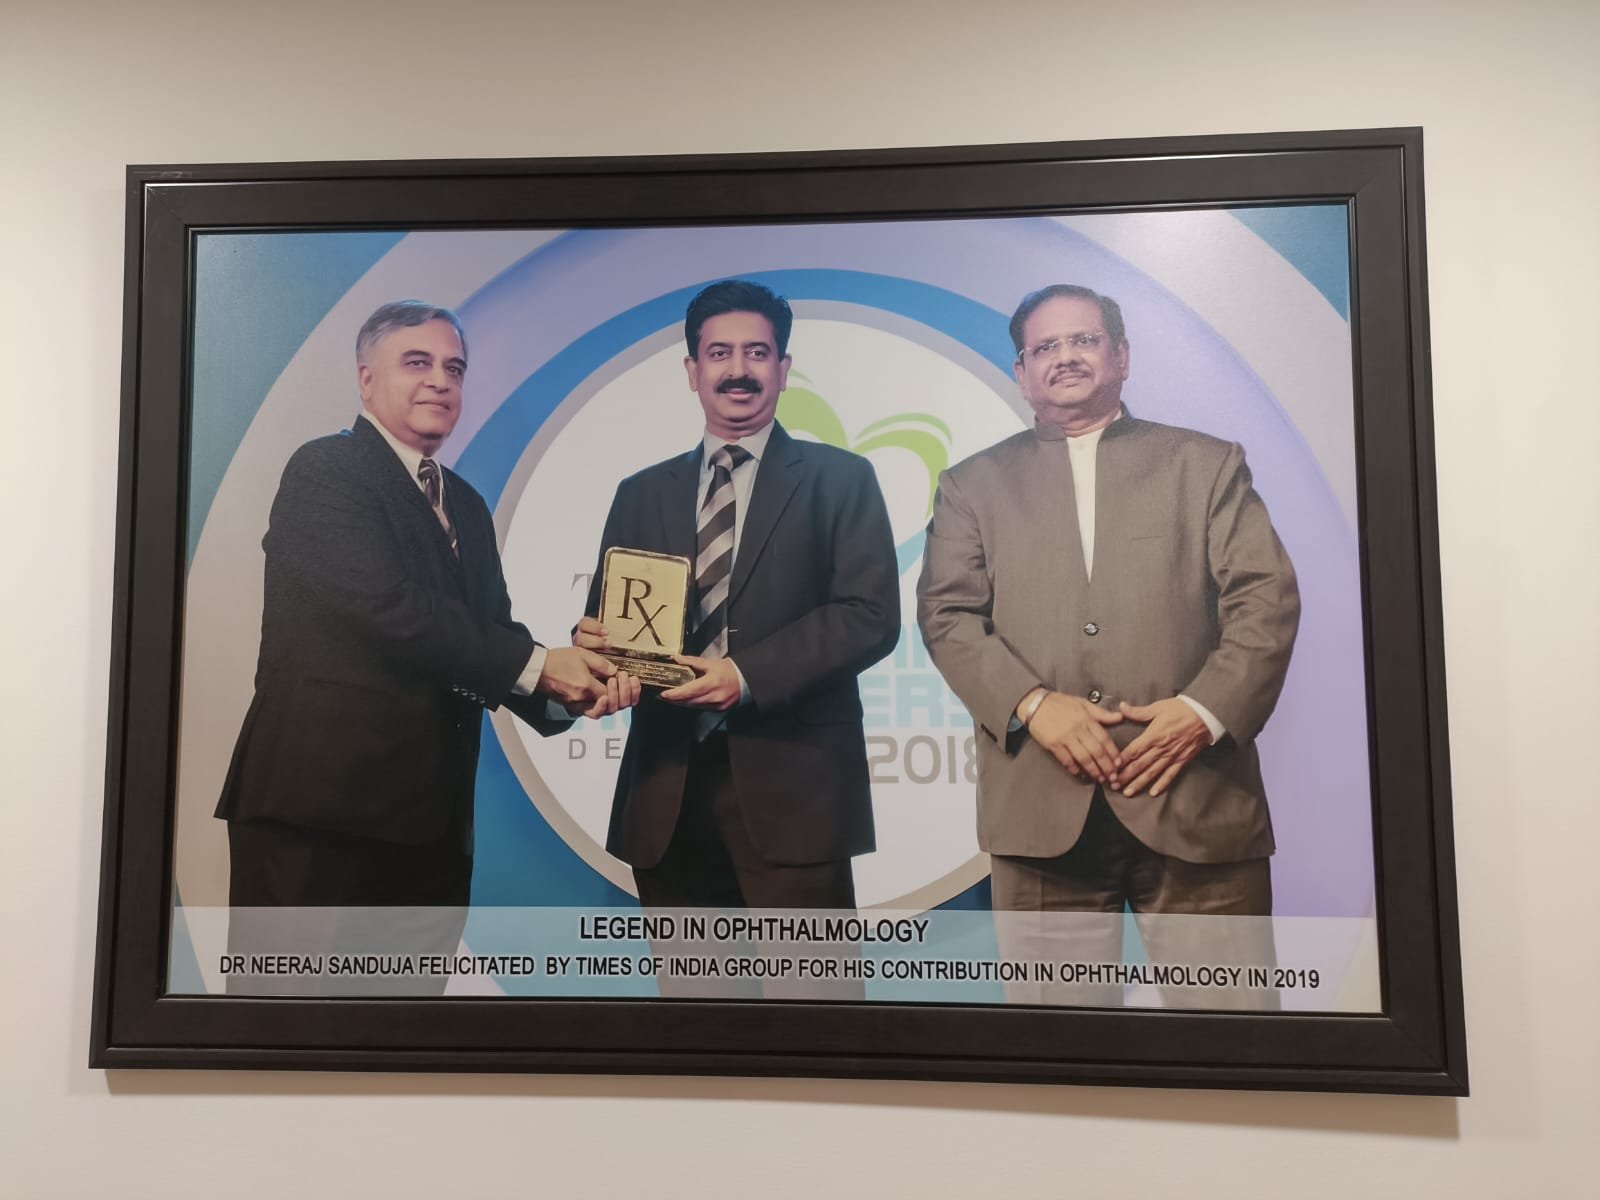 dr neearj sanduja receiving award for legend in opthalmology by time of india 2019